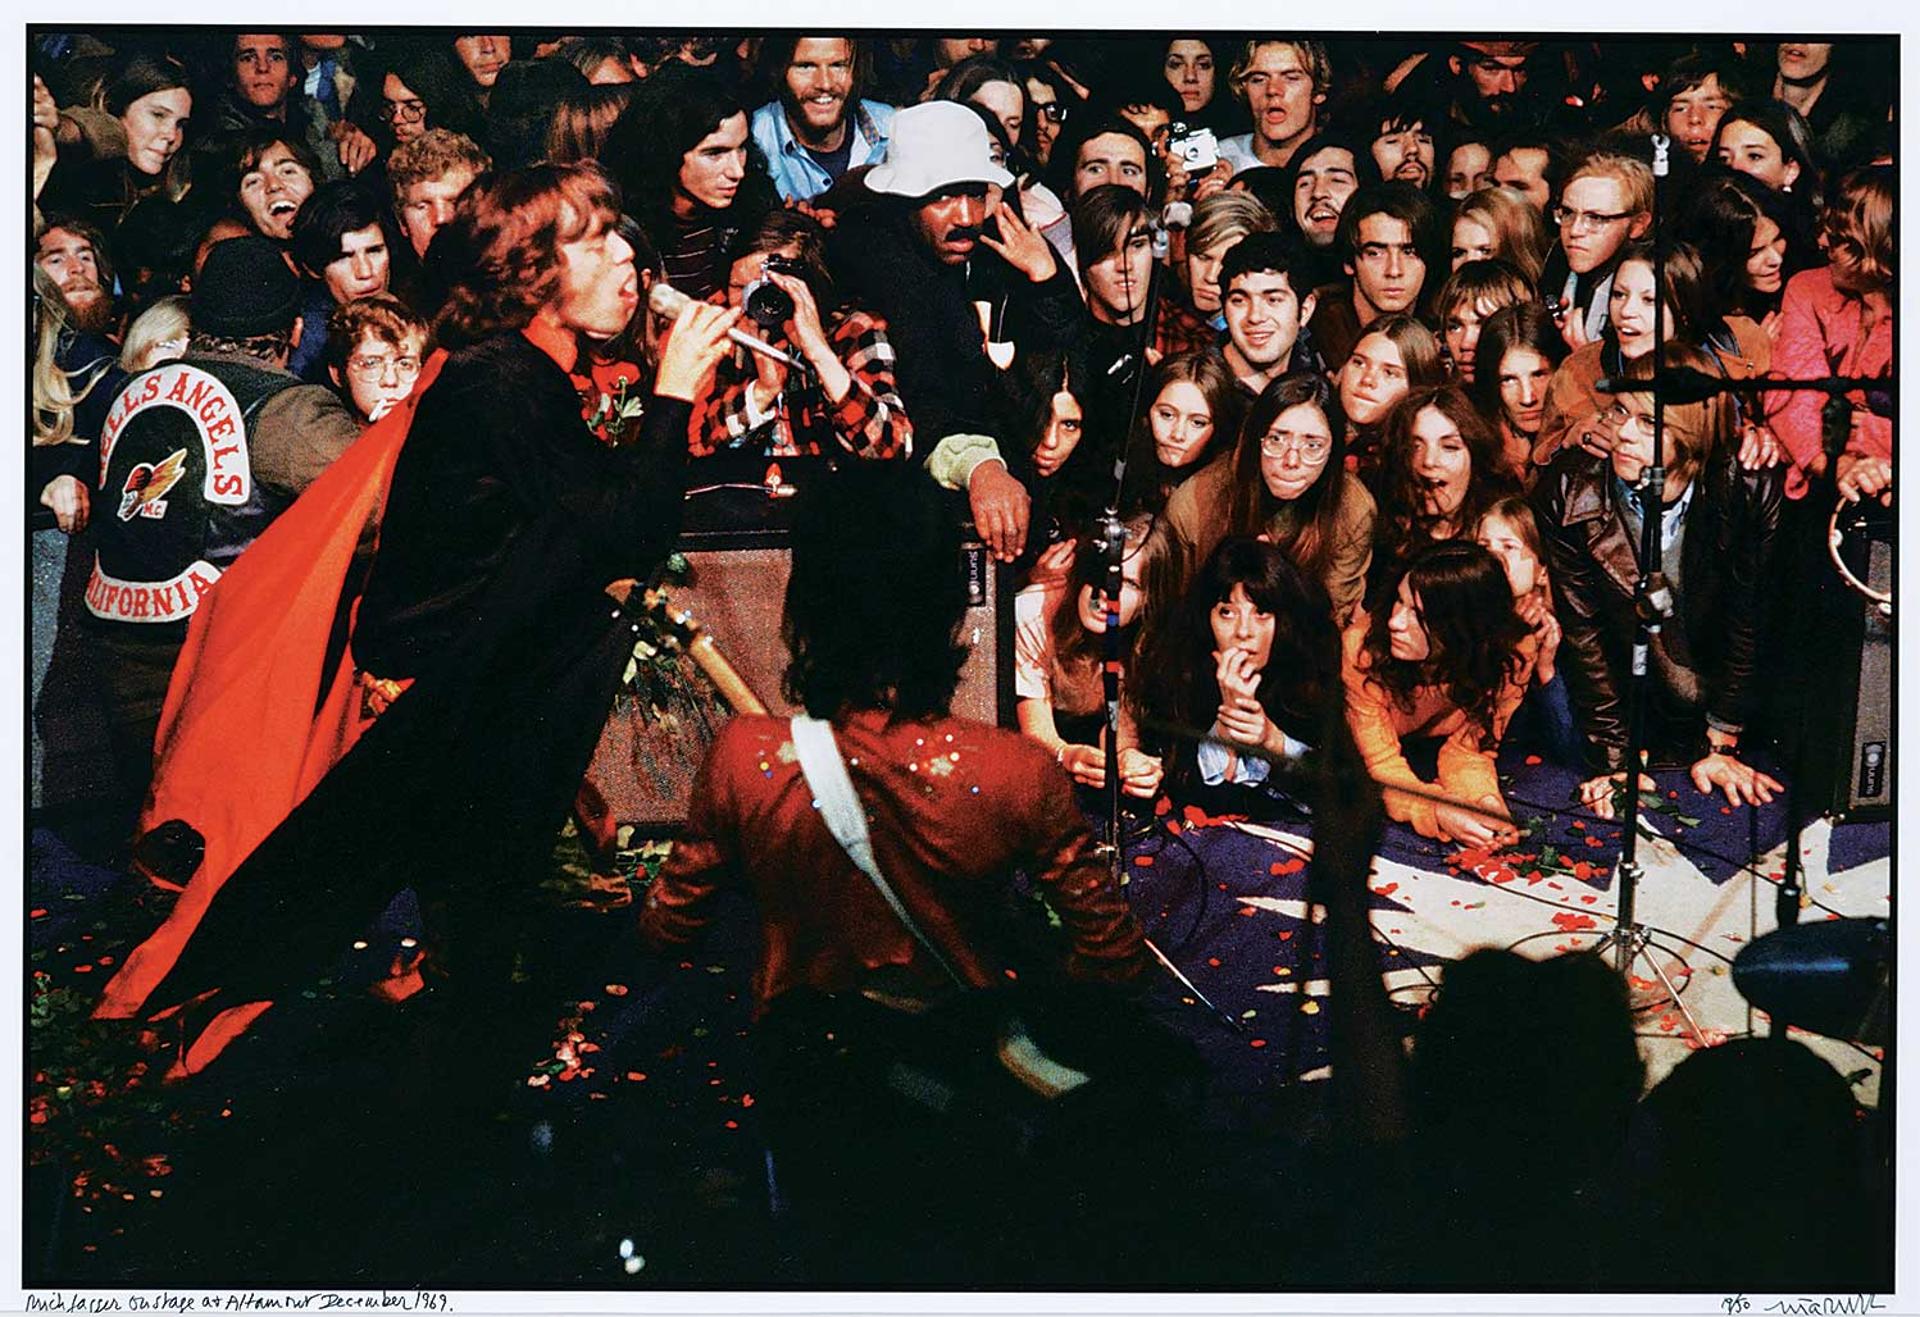 Ethan Russell (1945) - Mick Jagger on Stage at Altamont, December 1969  #19/50